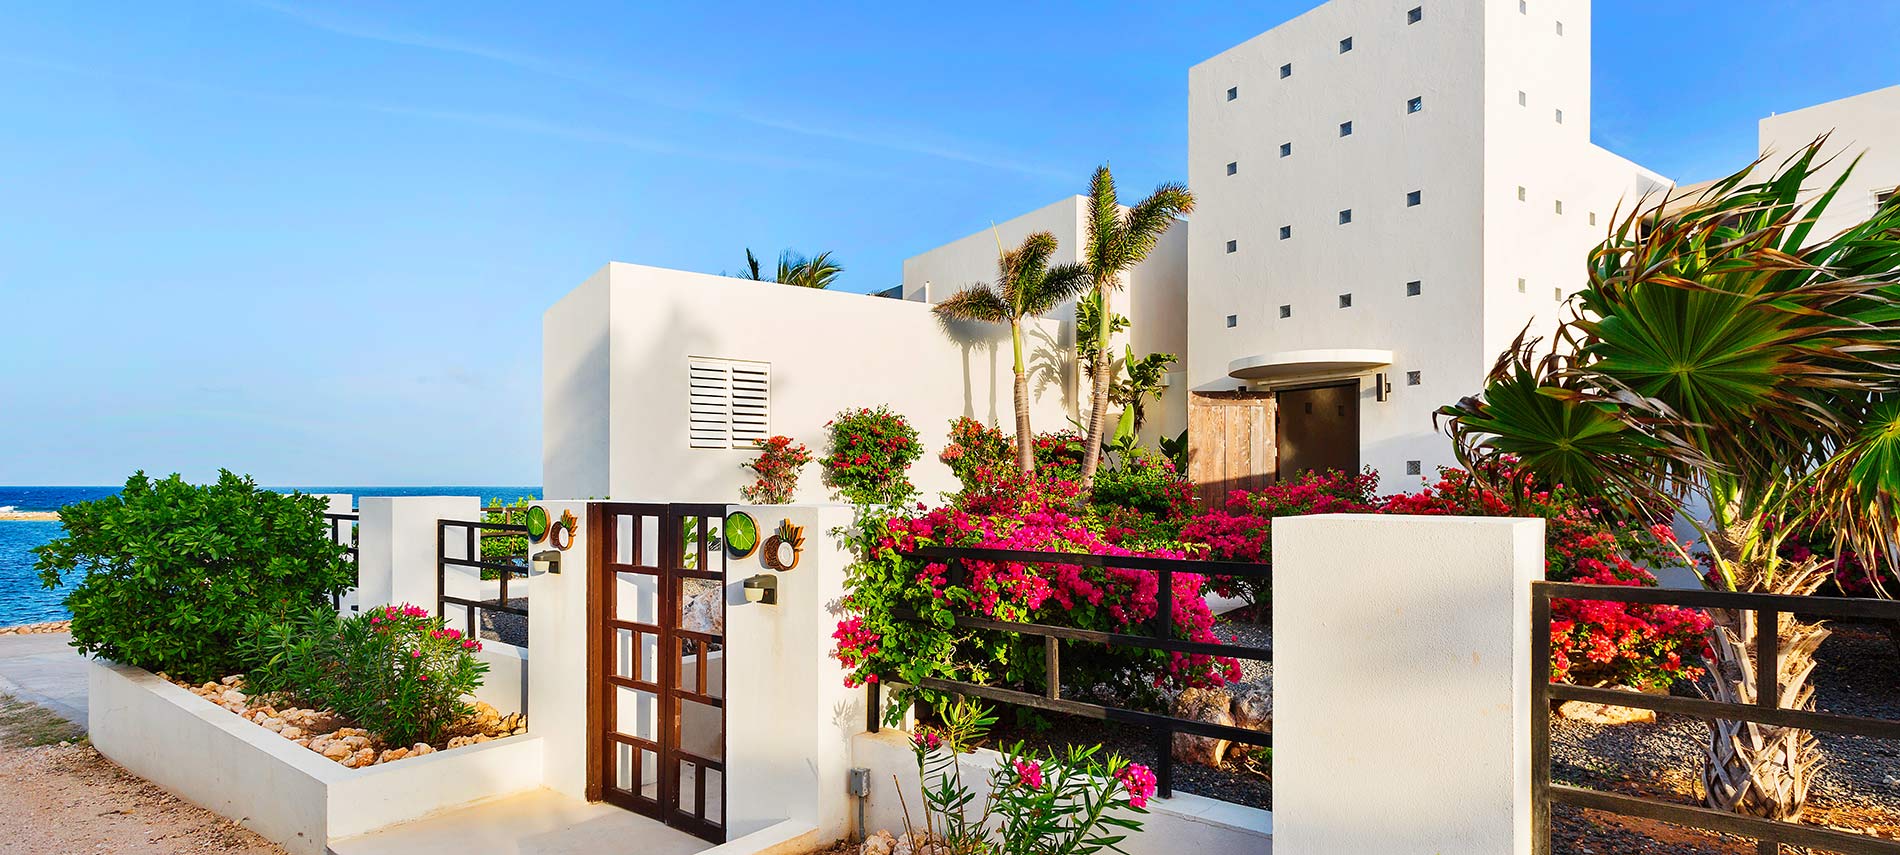 Limin' Da Coconut Villa on Anguilla features a dramatic entry with lush gardens.